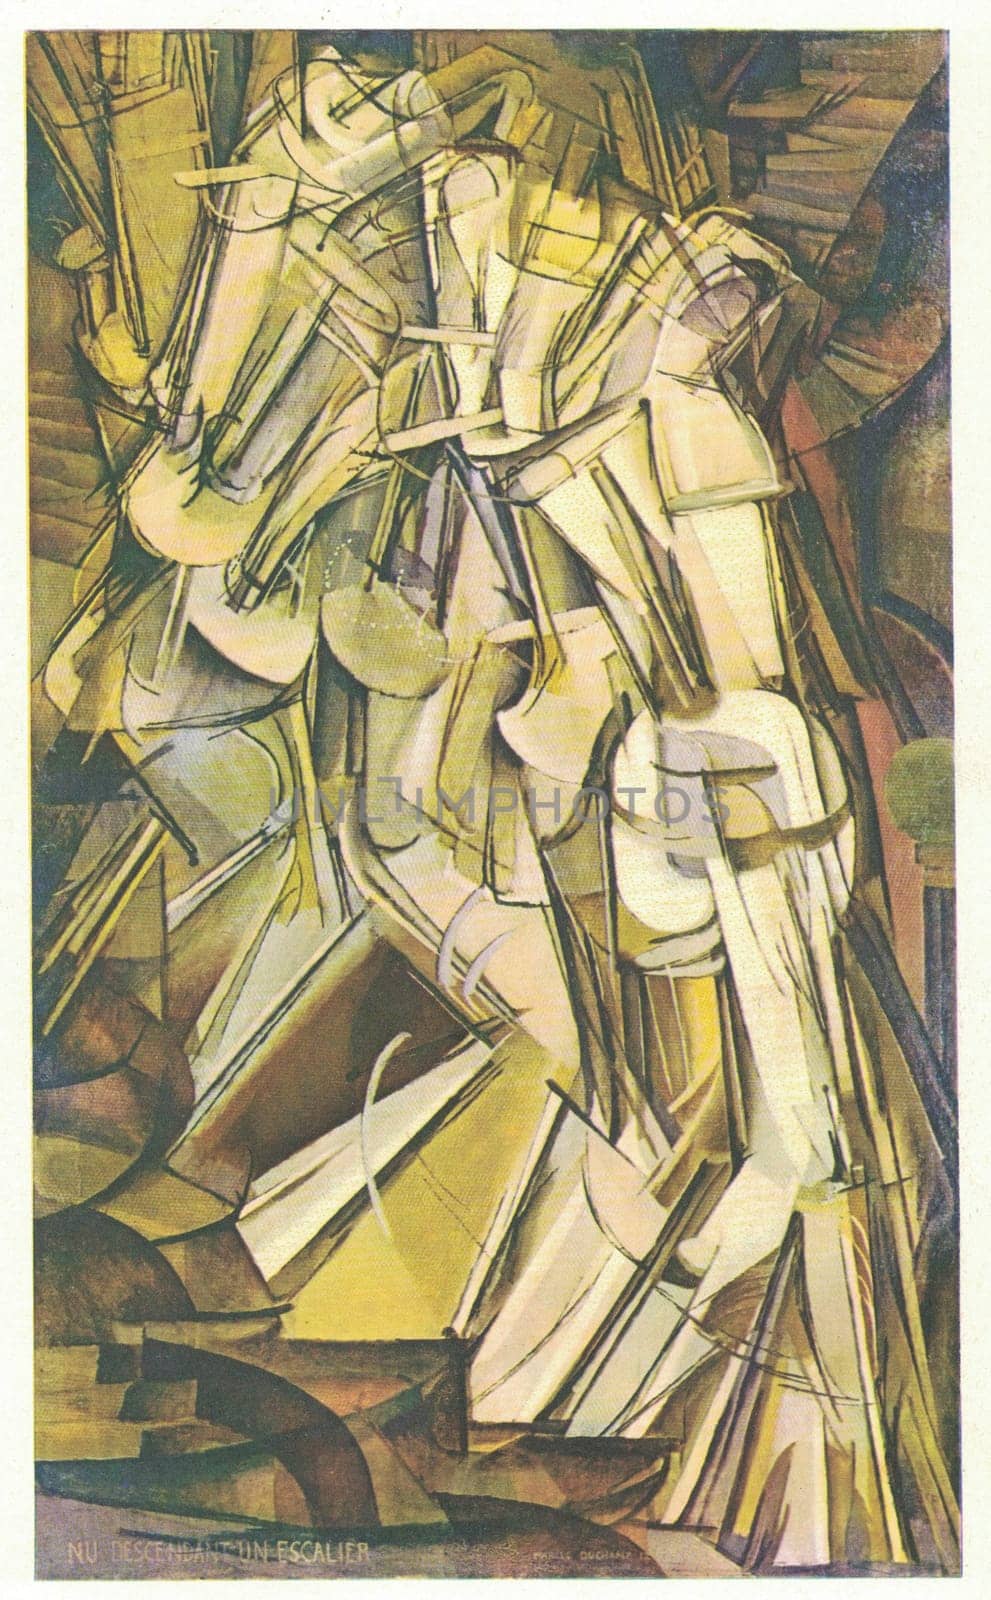 Nude Descending a Staircase, No. 2, 1912. Painting by Marcel Duchamp. The painting was created when the artist was twenty-five years old. After being rejected by the Cubitsts as being Futurist, it was presented at the Paris Salon of Independents and then caused a large stir when presented at the 1913 Armory Show in New York. Duchamp placed the title at the bottom of the painting,